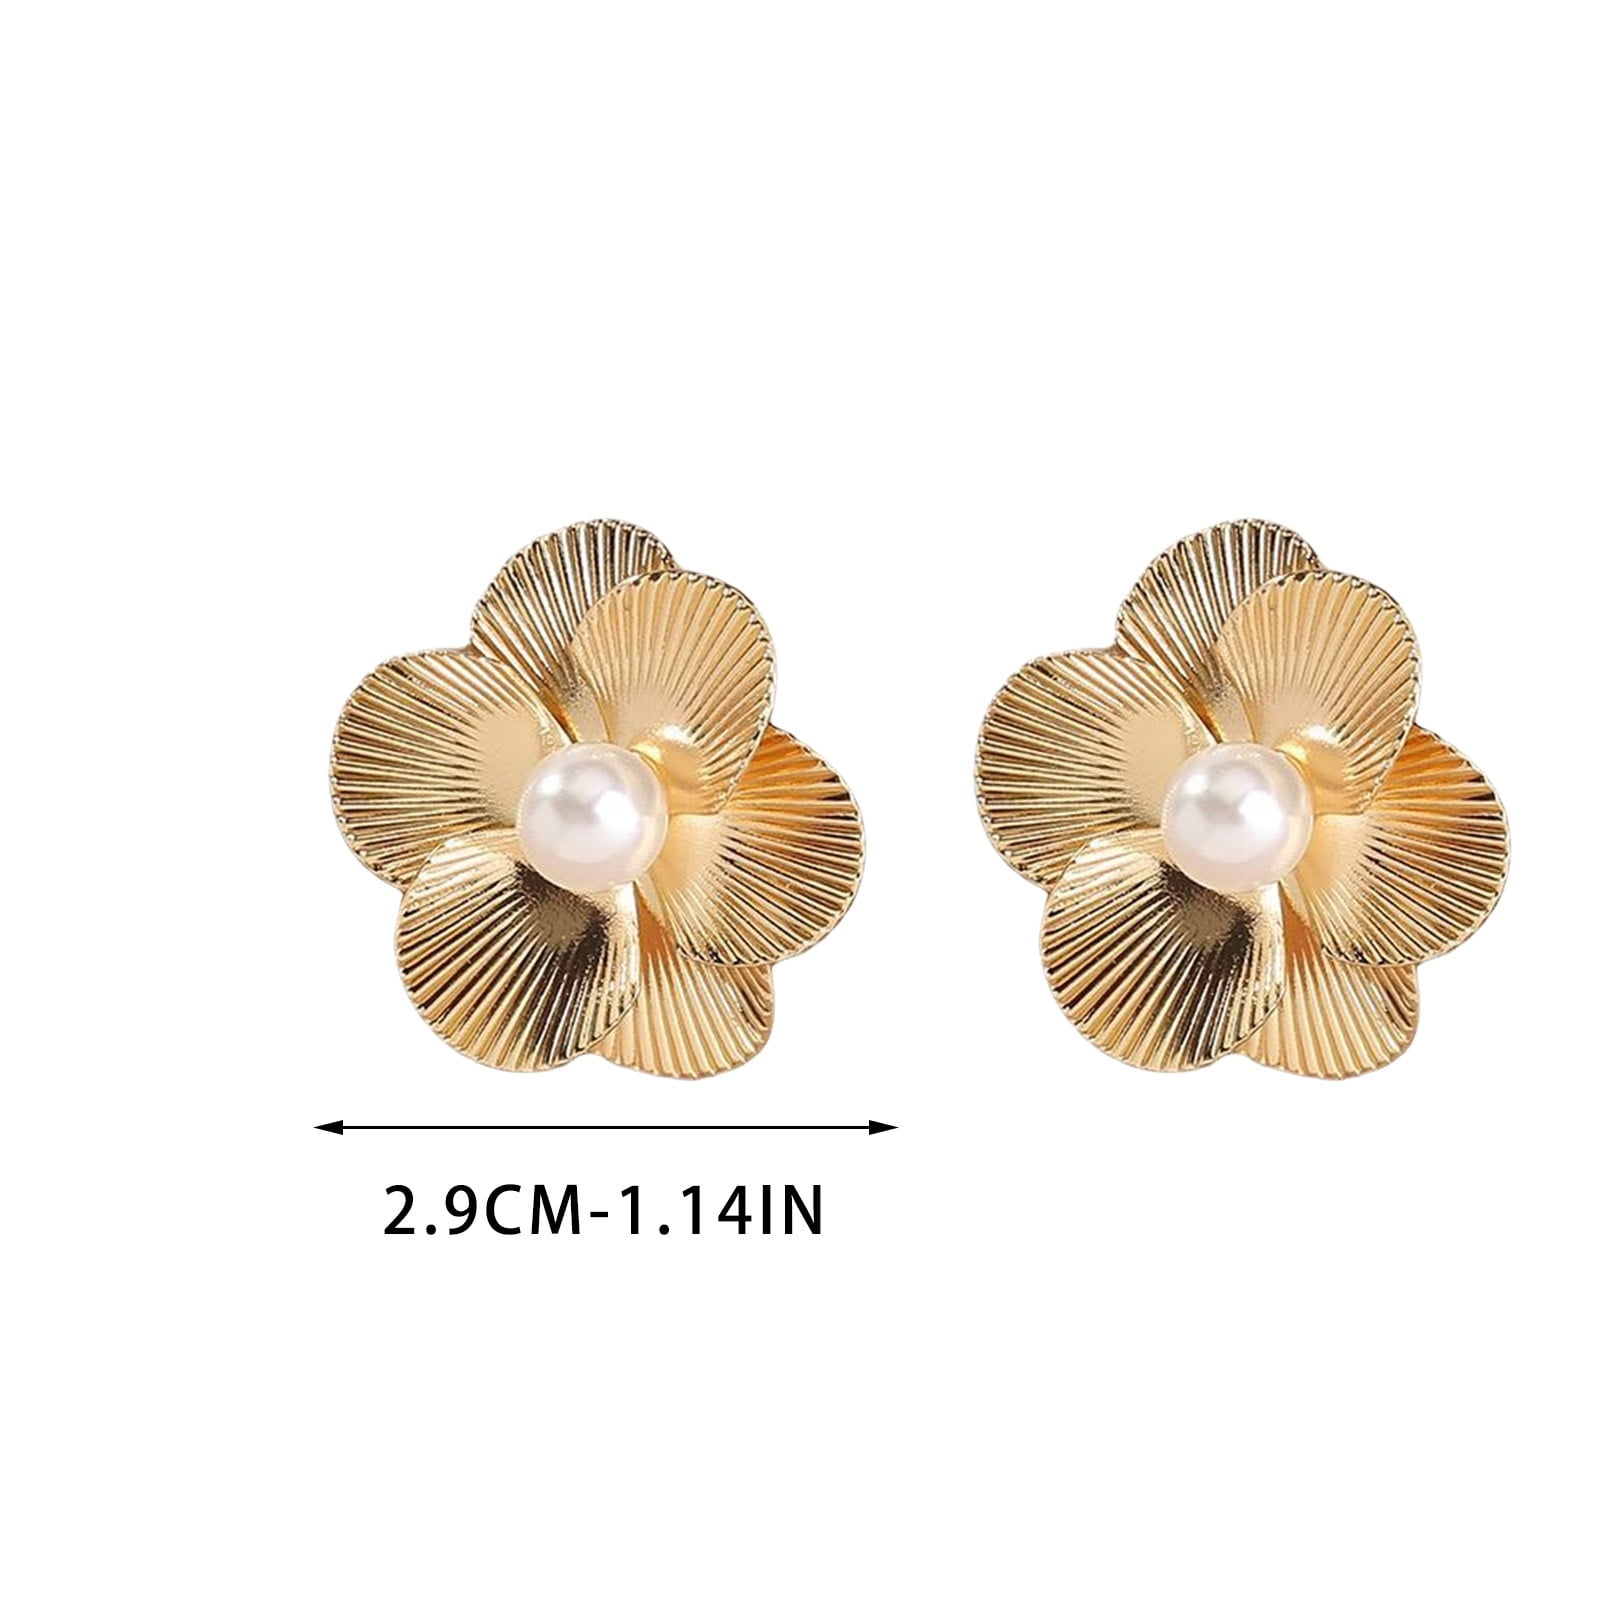 Wmkox8yii Creative Pearl Flower Earrings Flash Gradient Cicada Wing Earrings  For Prom Party 